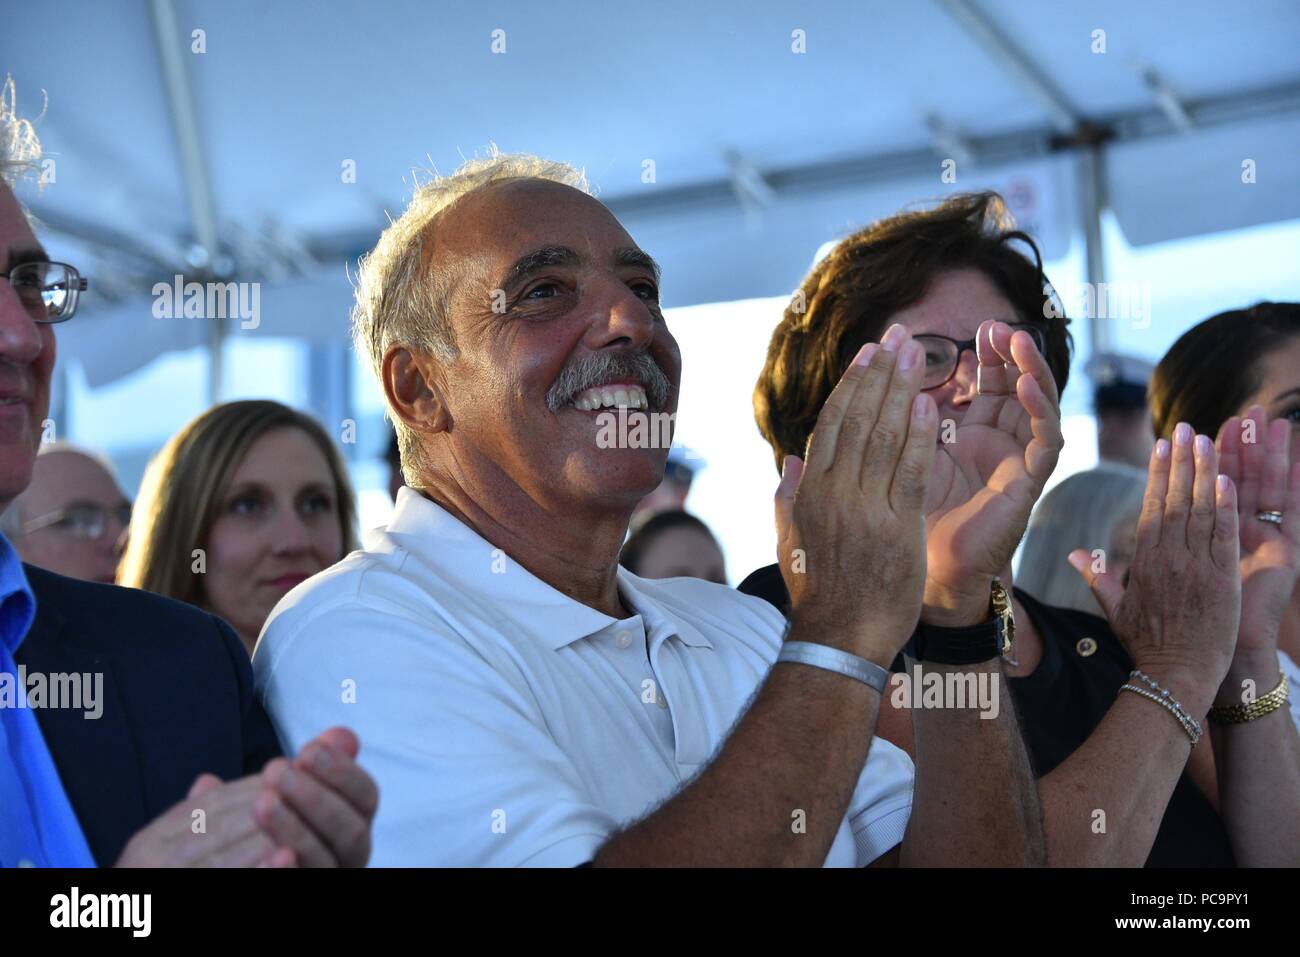 Rick Bruckenthal applauses following his daughter Noabeth Bruckenthal's speech during the commissioning ceremony for the Coast Guard Cutter Nathan Bruckenthal in Old Town Alexandria, Virginia, July 25, 2018, July 25, 2018. Bruckenthal is the Coast Guard's 28th Fast Response Cutter named after Coast Guard Petty Officer 3rd Class Nathan Bruckenthal, who was fatally wounded during Operation Iraqi Freedom in the Arabian Gulf in 2004. U.S. Coast Guard photo by Petty Officer 1st Class Jetta Disco. Image courtesy Petty Officer 1st Class Jetta Disco/U.S. Coast Guard Headquarters. () Stock Photo